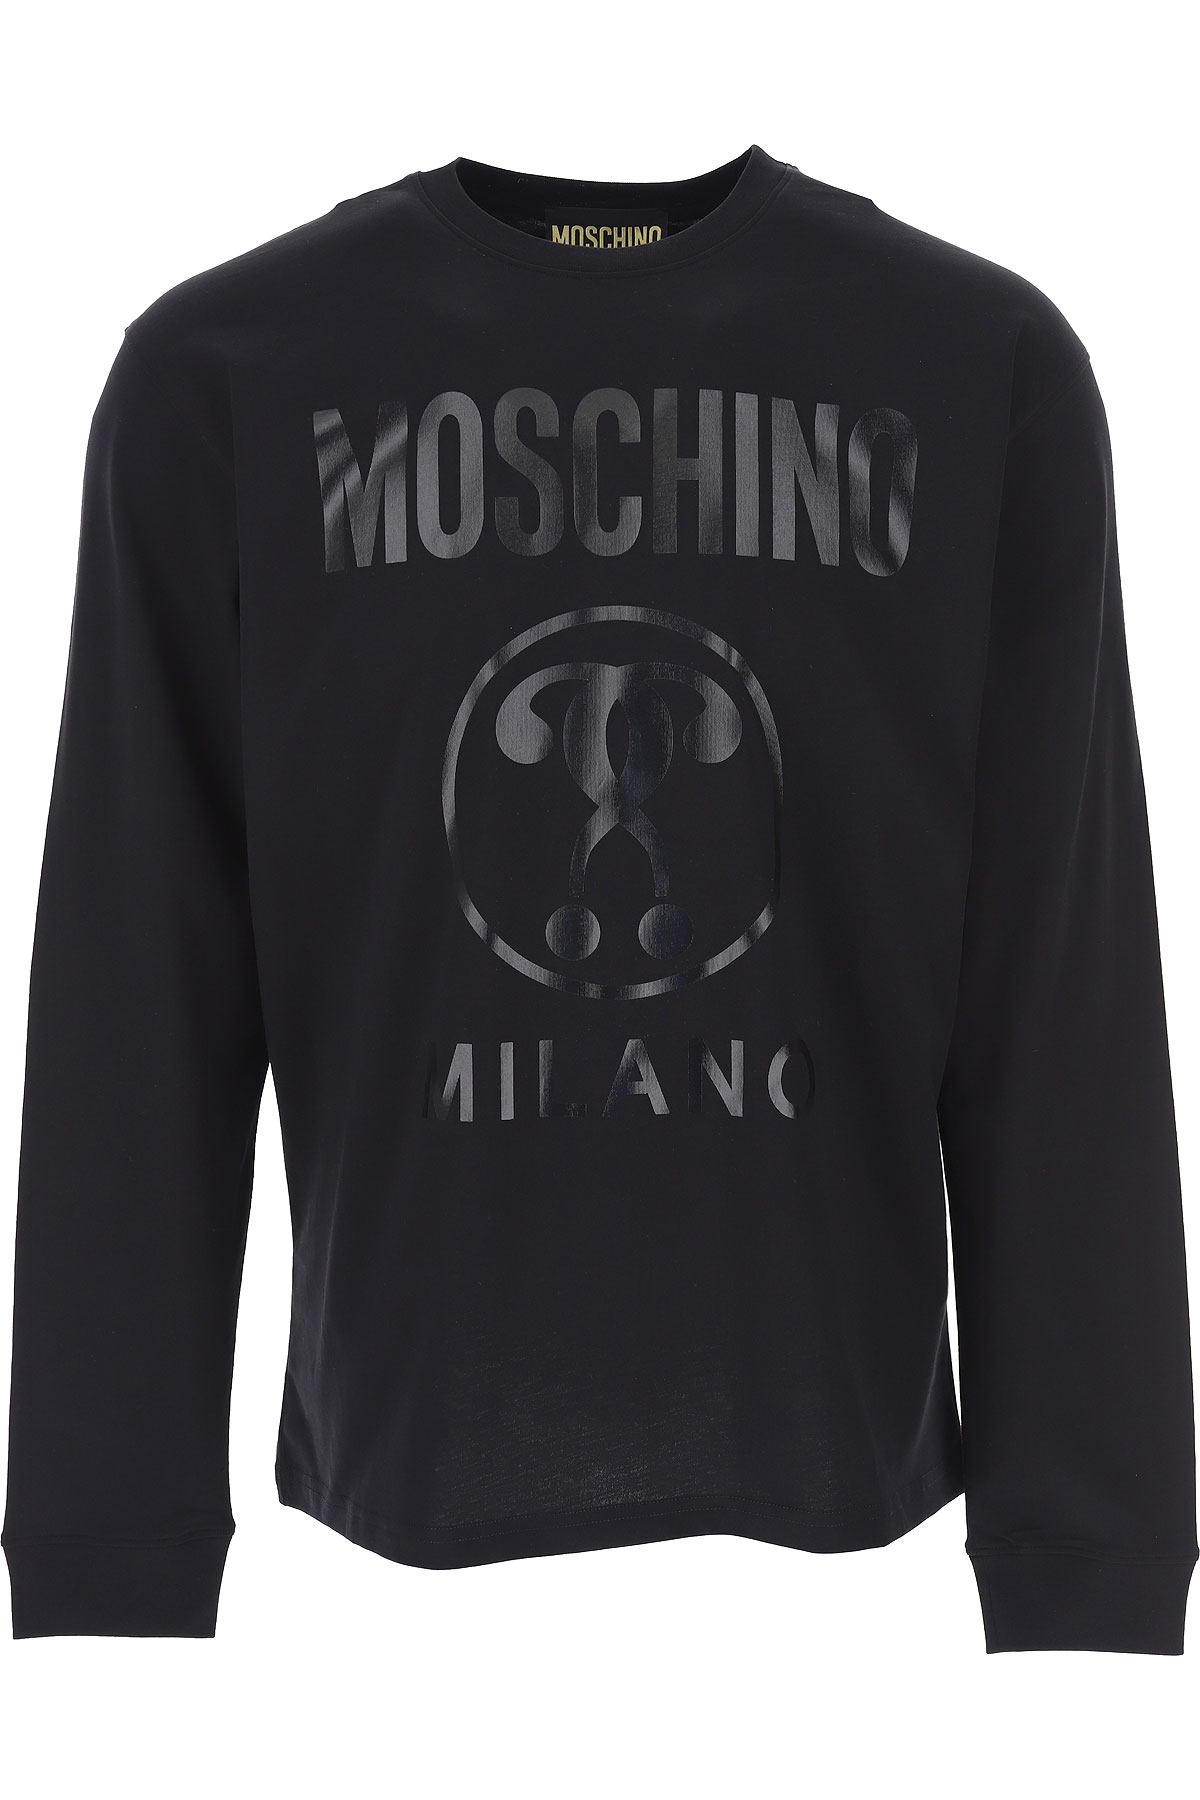 Mens Clothing Moschino, Style code: a1201-2041-0555